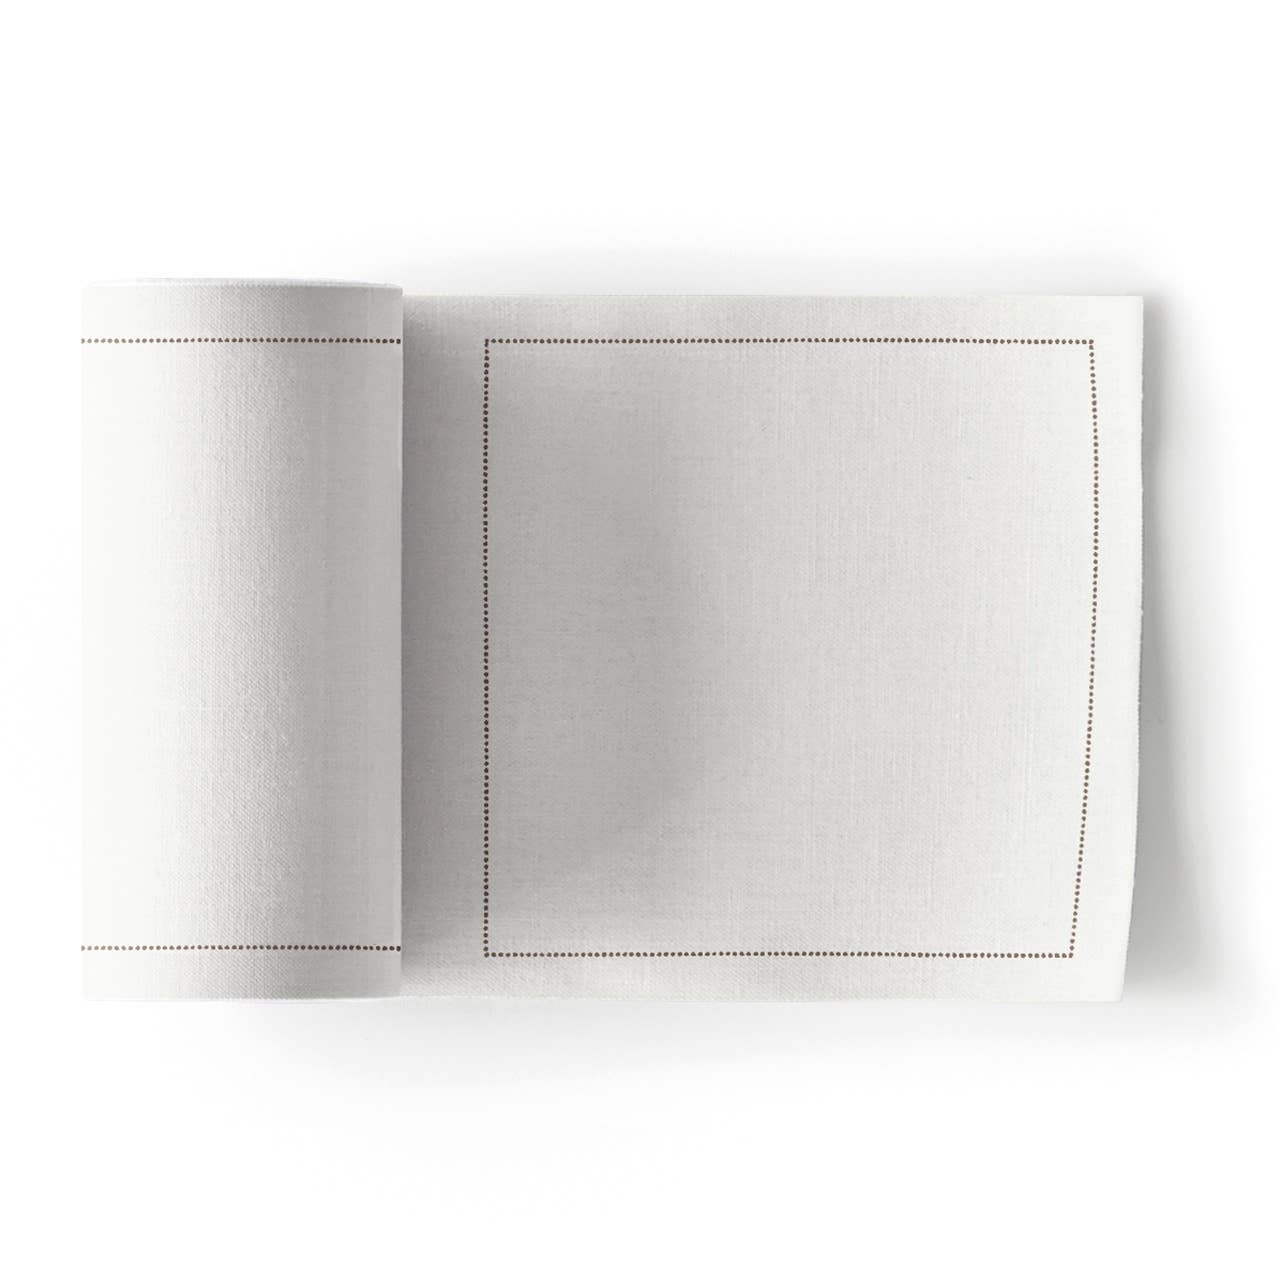 Curry 50 units per roll 4.5 x 4.5 in Cotton Cocktail Napkin